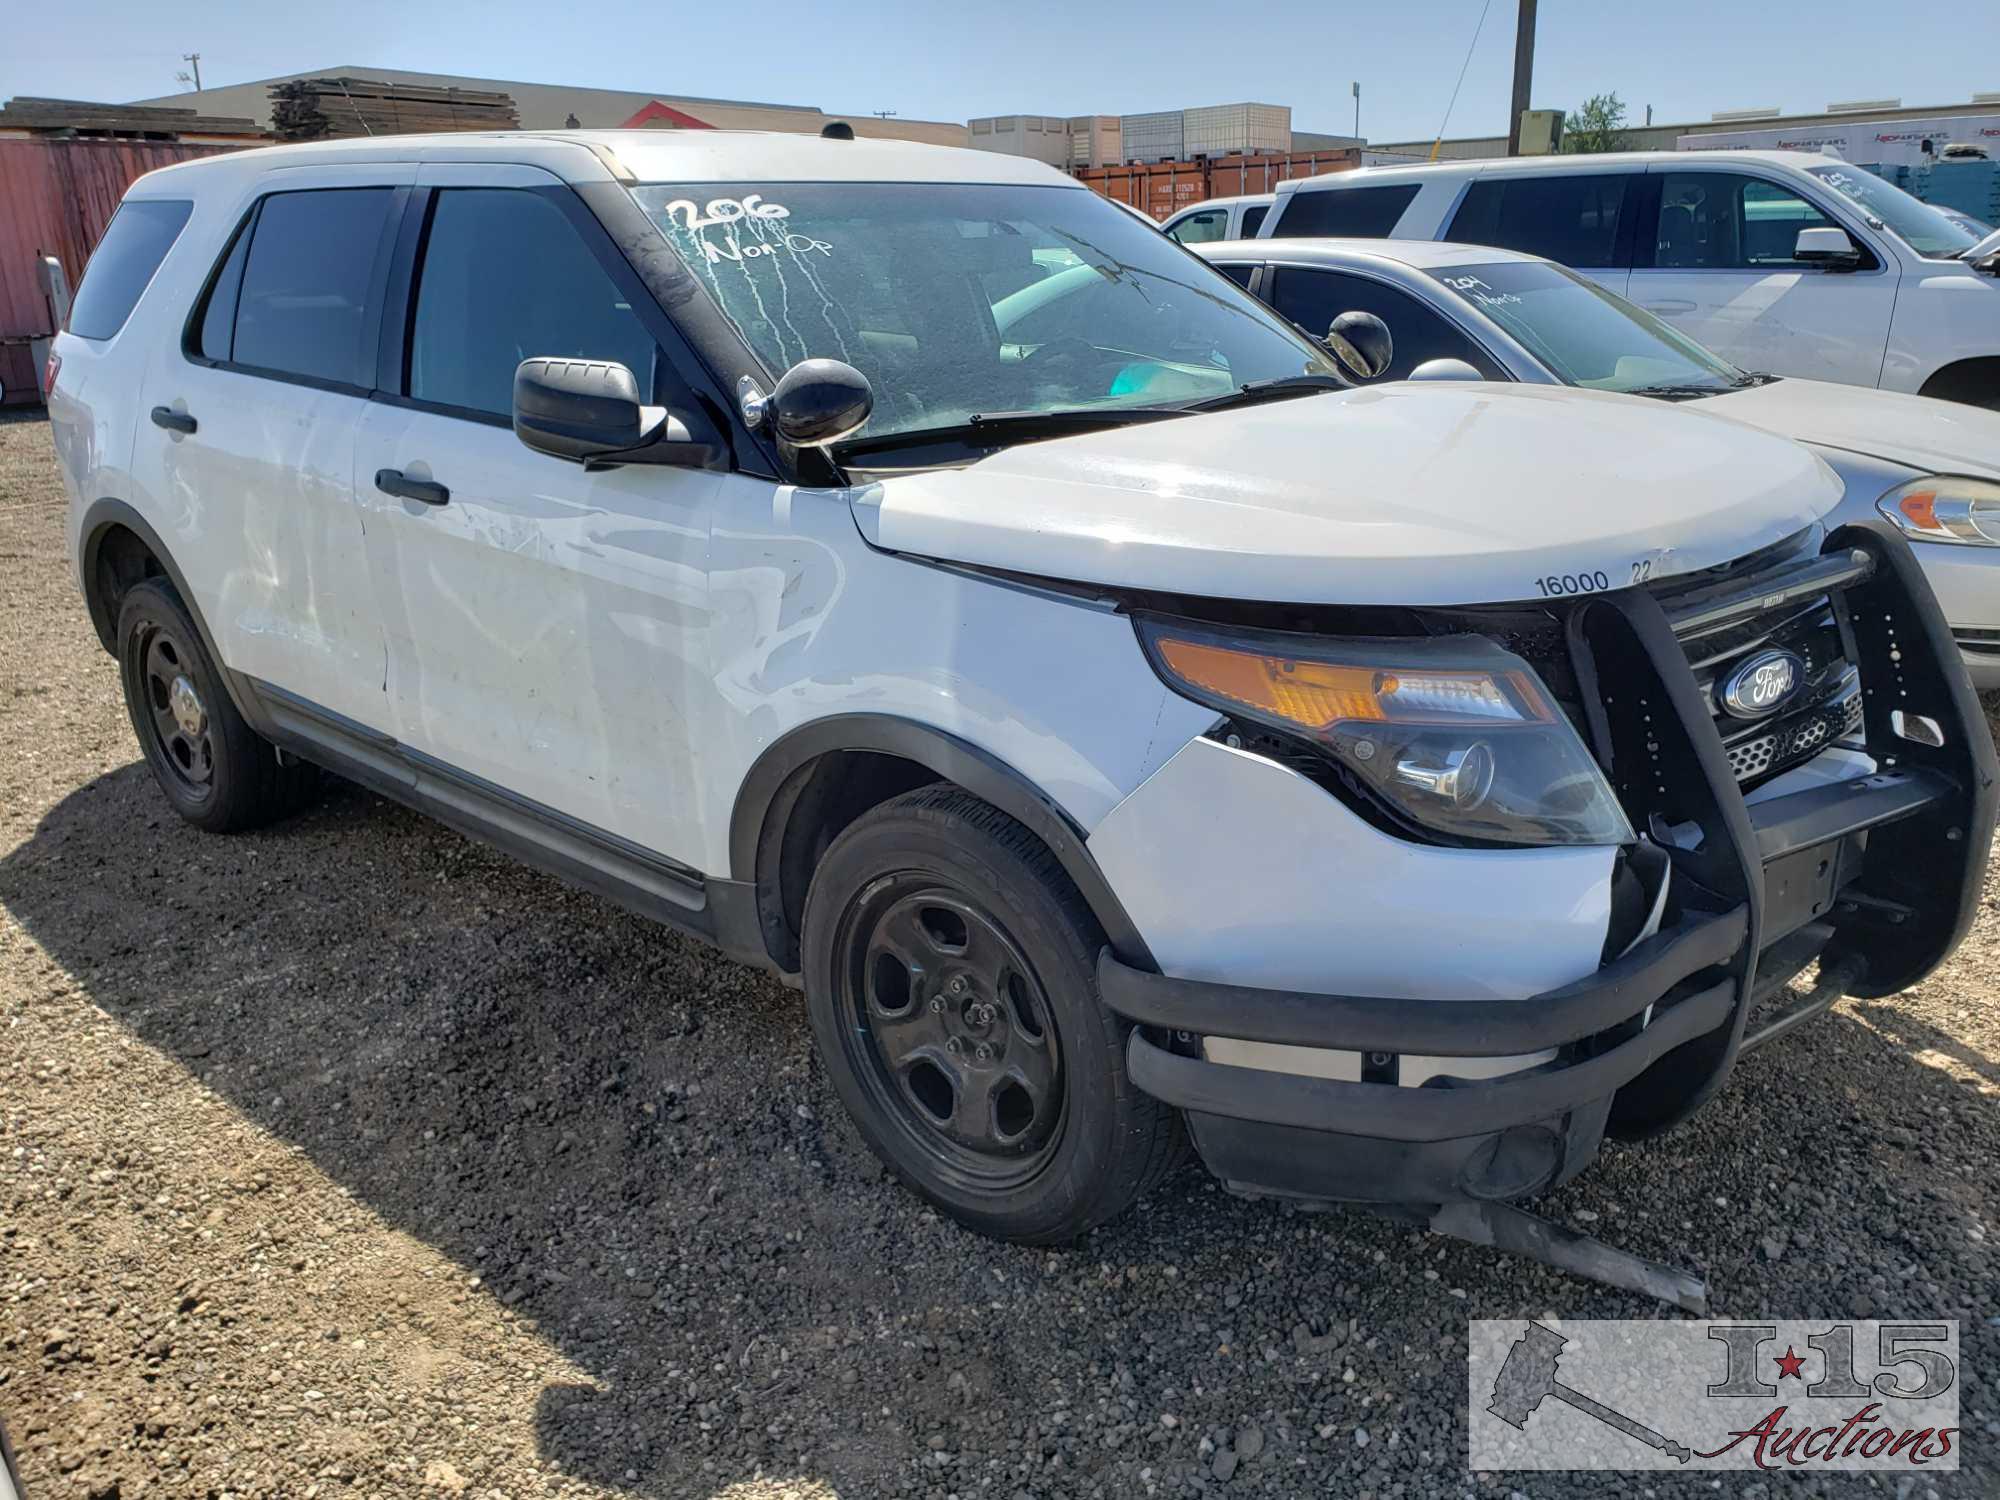 2014 Ford Explorer, White This will be sold on NON OP. Buyer responsible for smog